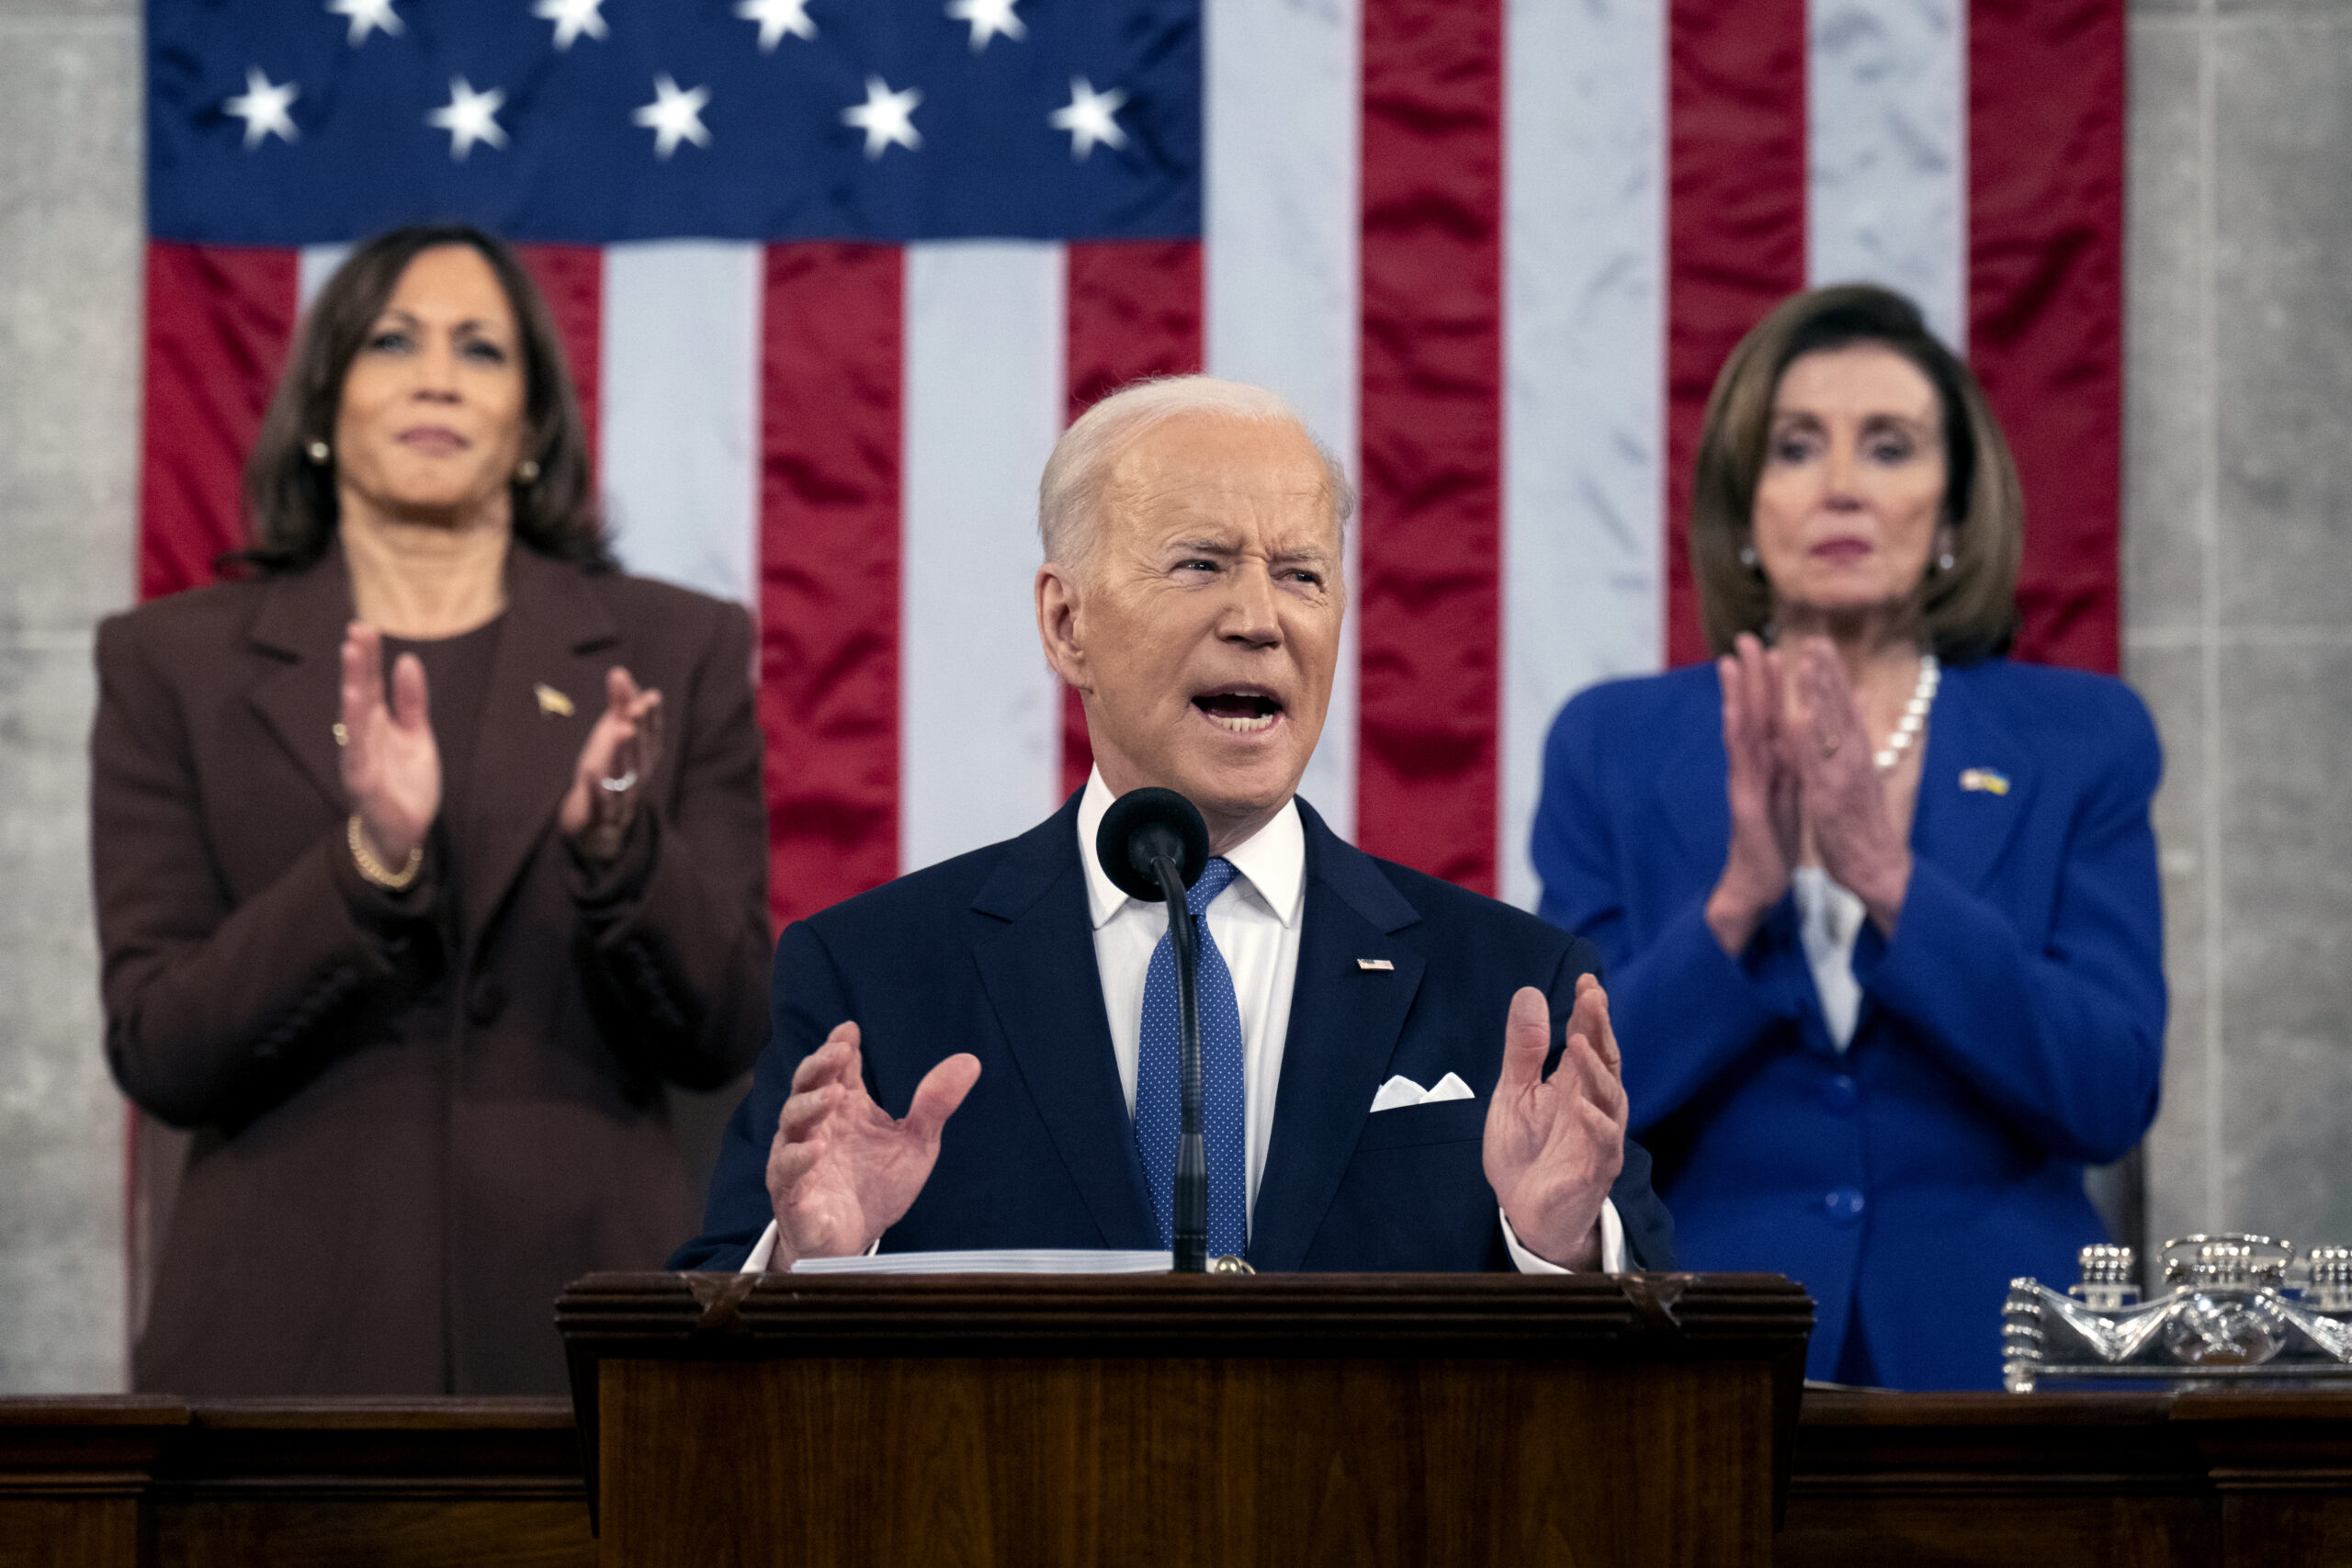 President Joe Biden delivers his State of the Union address to a joint session of Congress at the Capitol, Tuesday, March 1, 2022, in Washington. (Saul Loeb, Pool via AP)